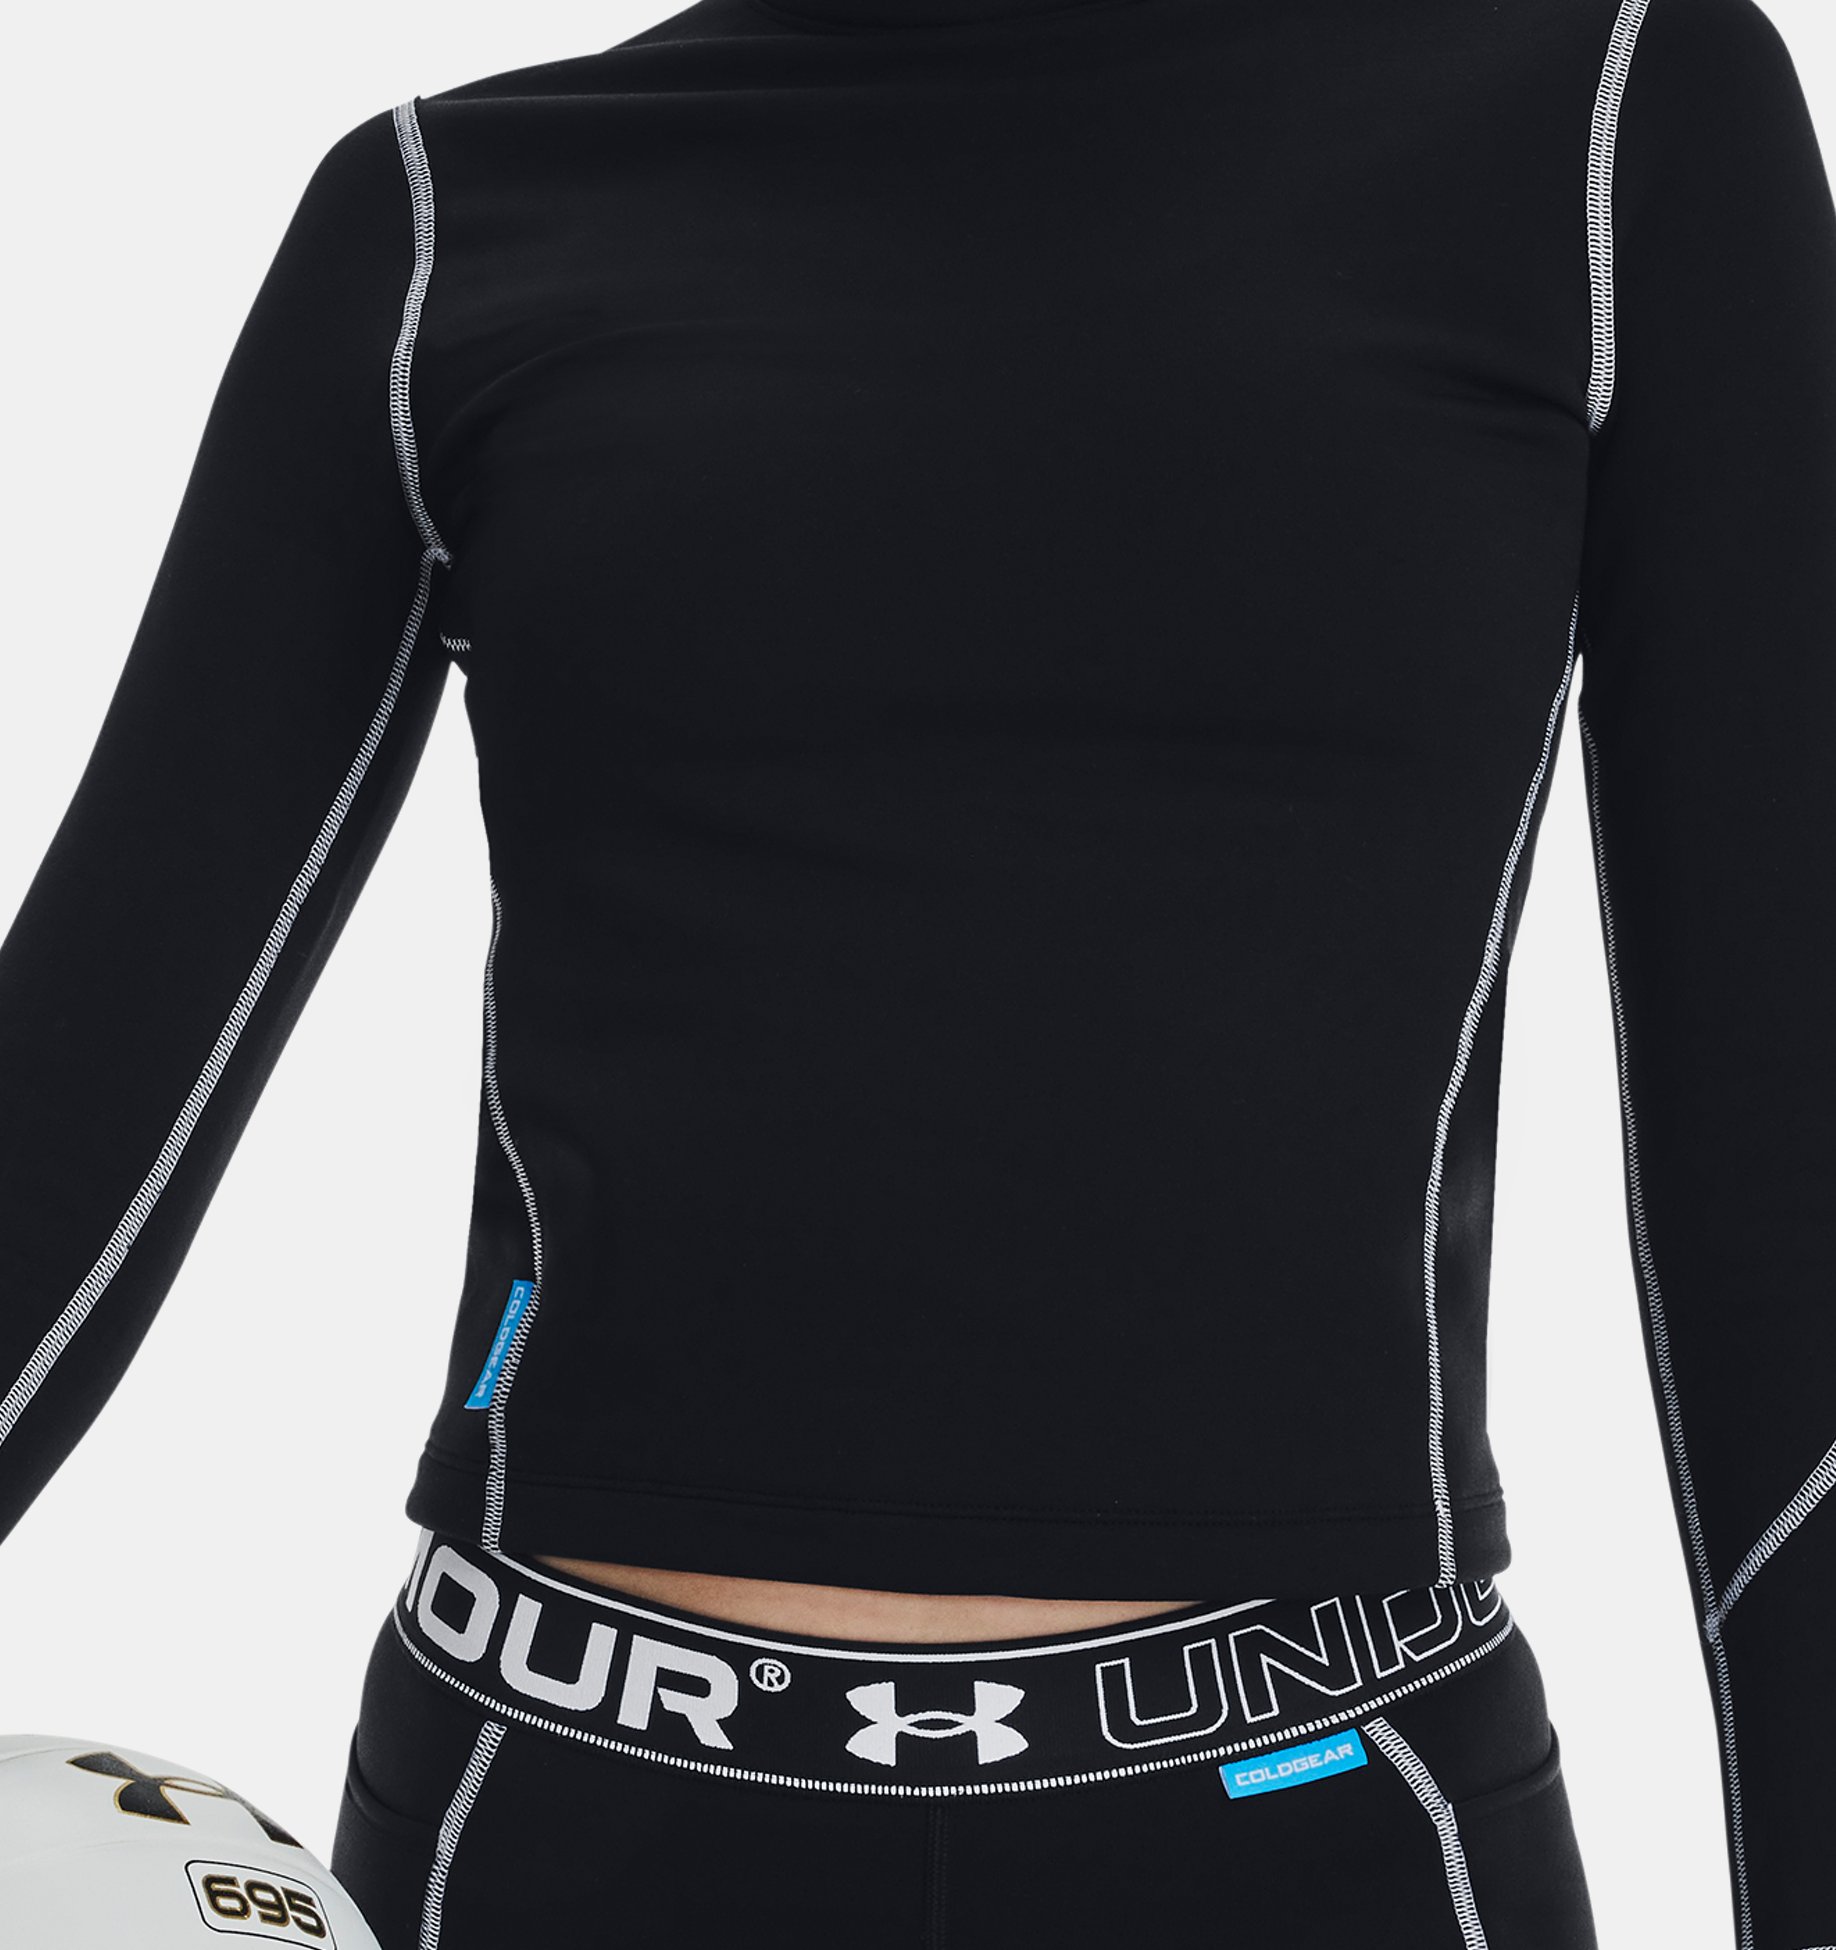 Under Armour Women's ColdGear 1/2 Zip, Grape Fusion/Grape Fusion, X-Small:  Buy Online at Best Price in Egypt - Souq is now